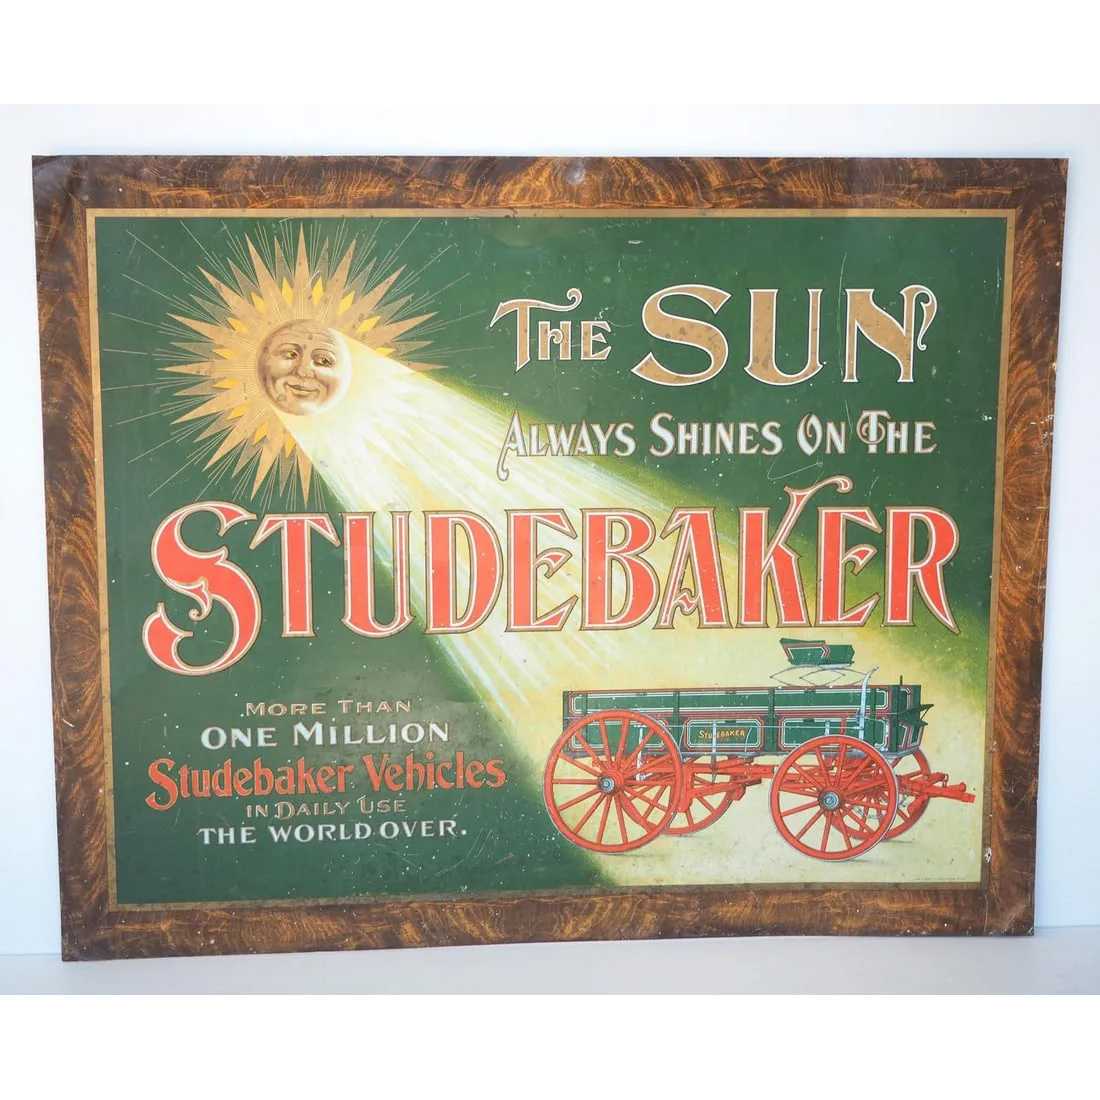 The Sun Always Shines On the Studebaker sign, which sold for $22,000 ($26,400 with buyer’s estimate) at Chupp.